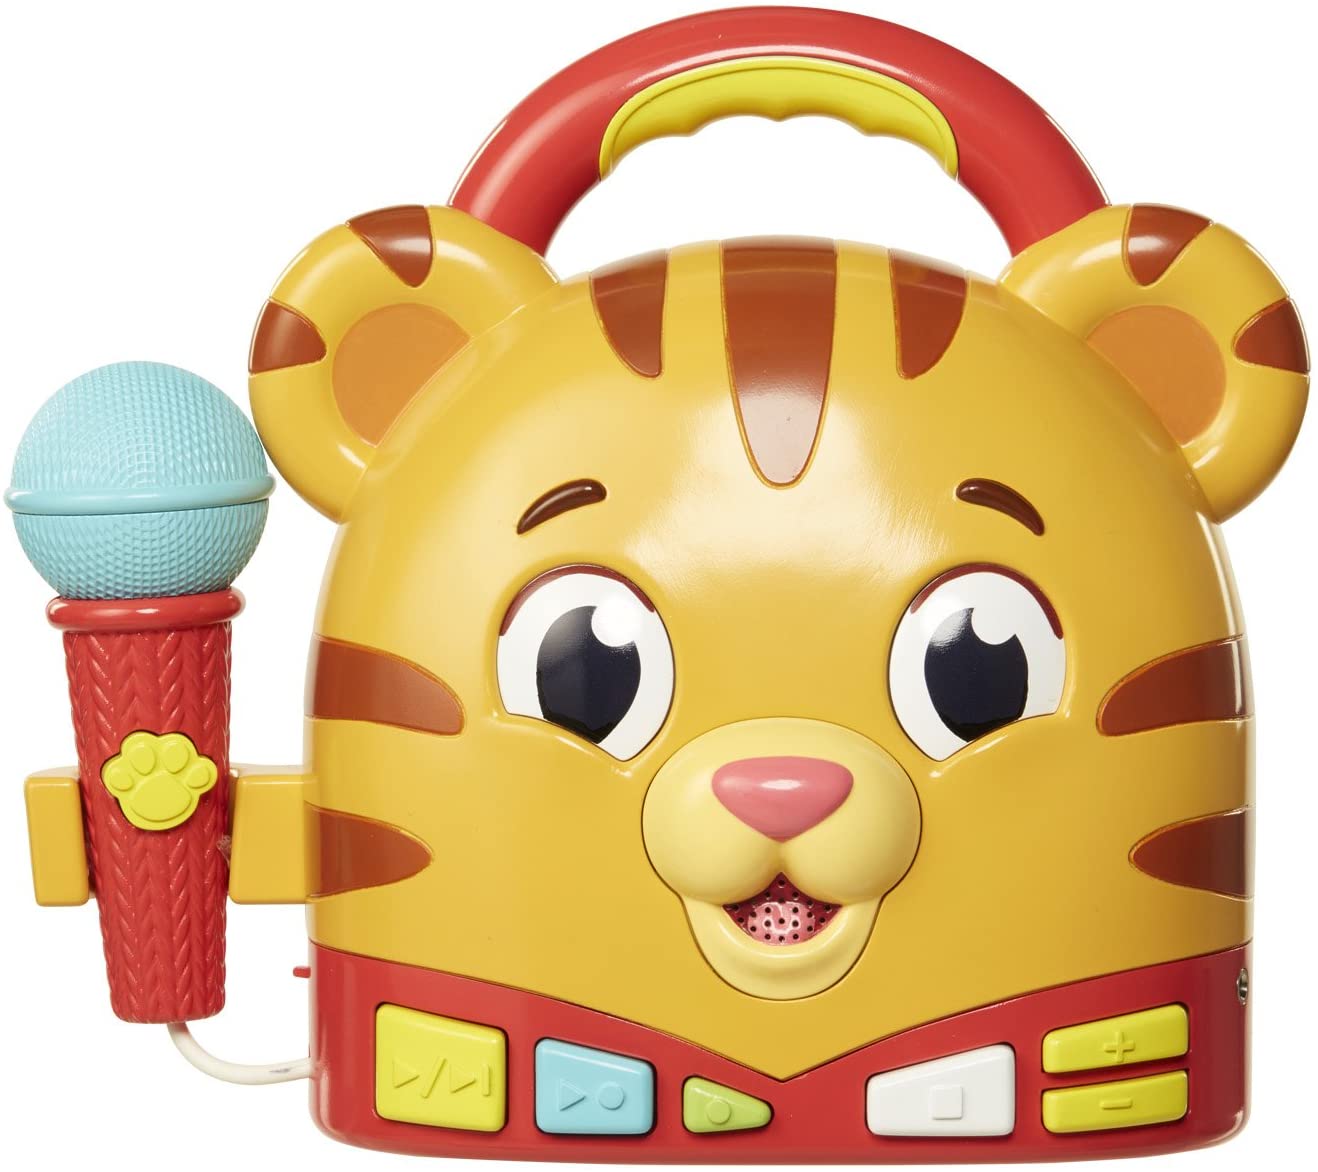 Daniel Tiger's Neighborhood Sing Along with Toy